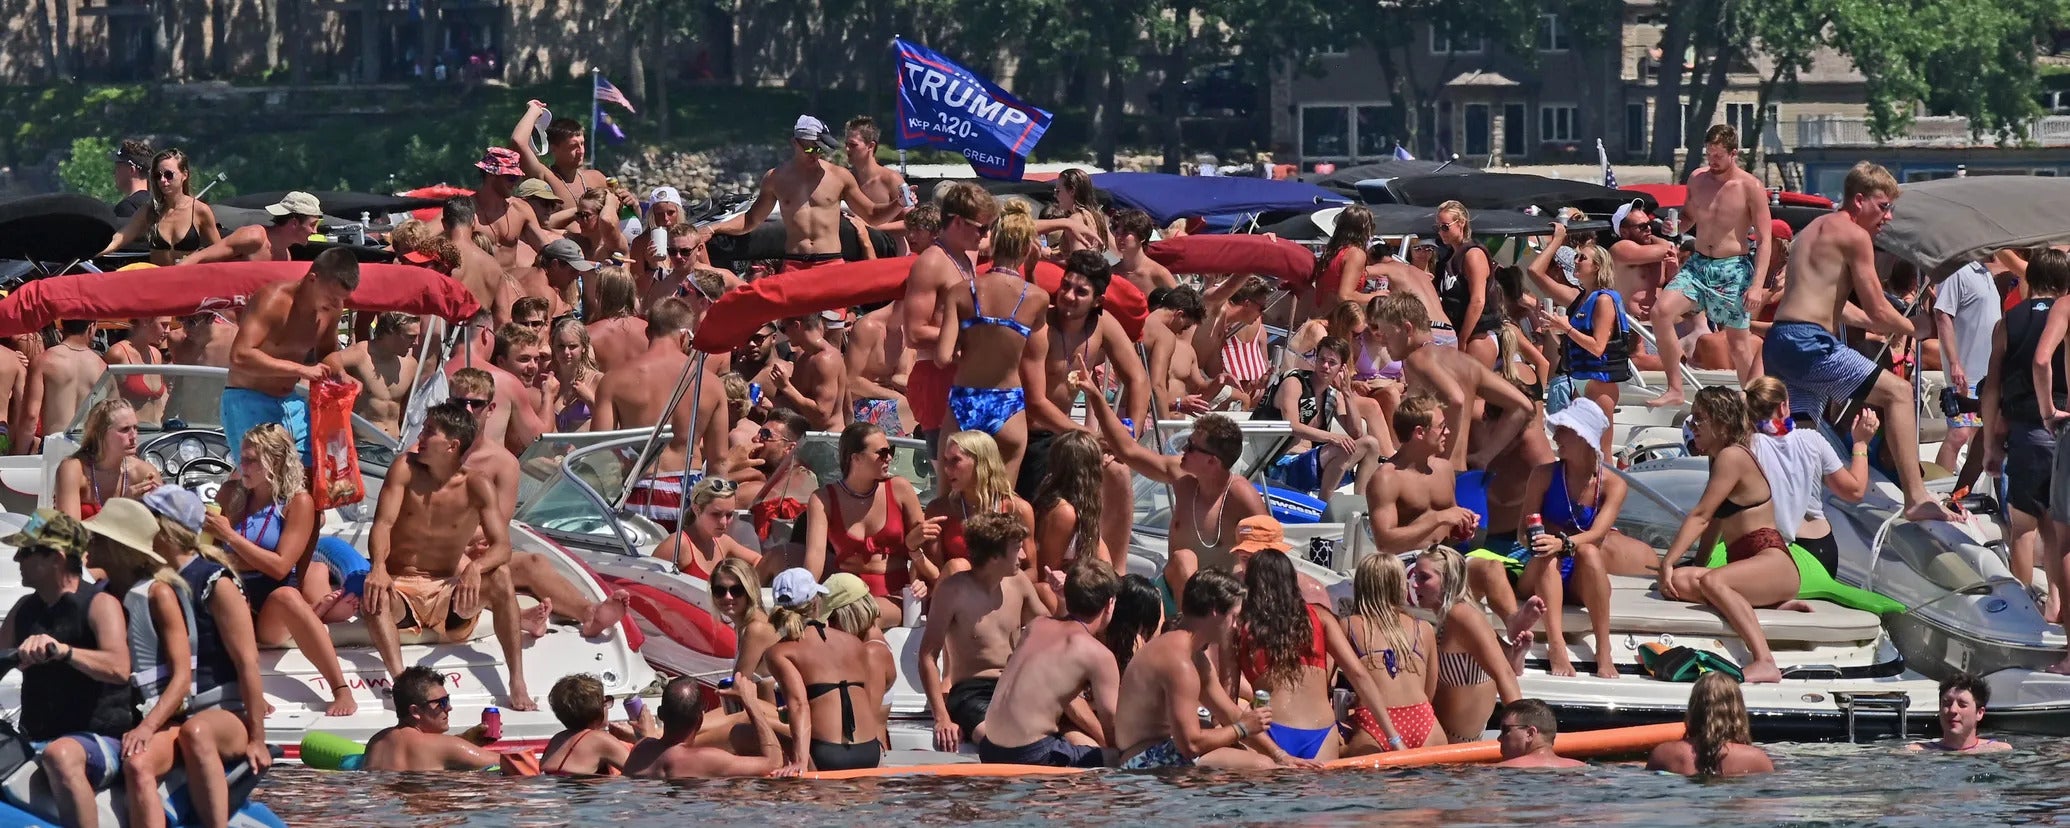 A party on Lake Okoboji in the Iowa Great Lakes region over July Fourth weekend. There are numberous individuals and none of them wears a mask